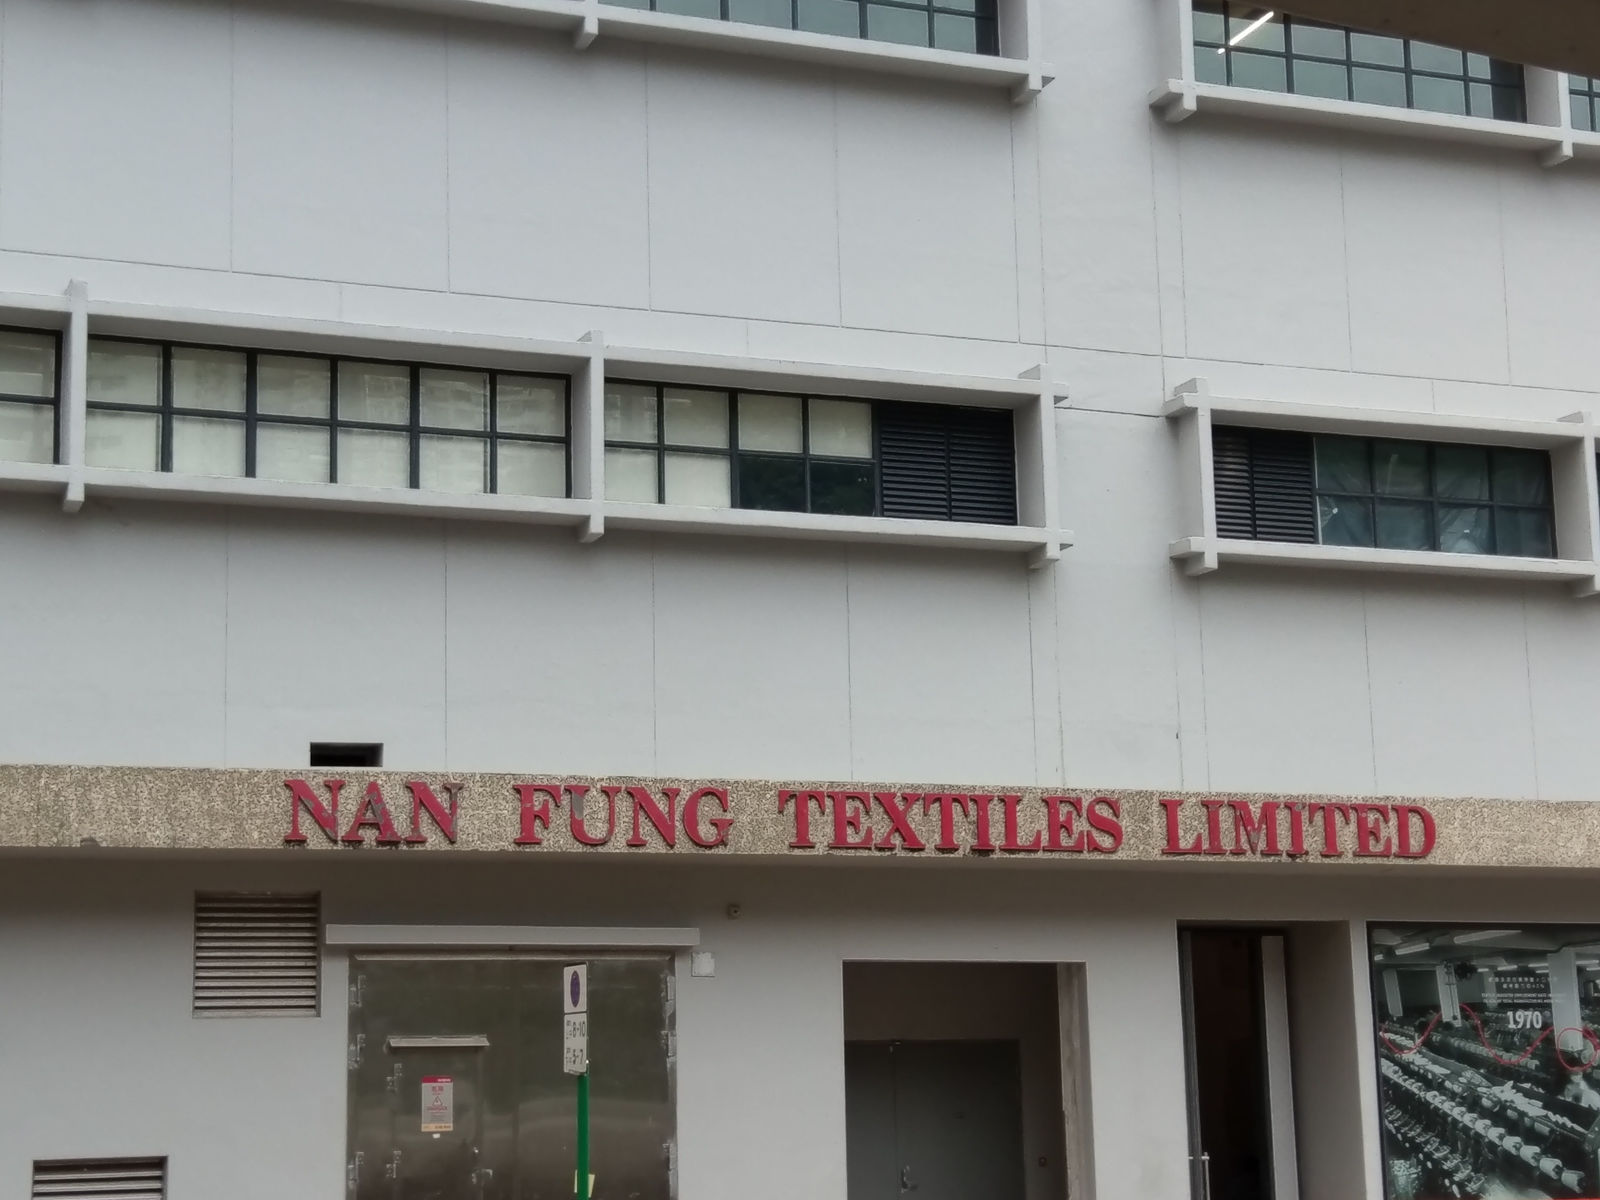 Nan Fung Textile Limited sign